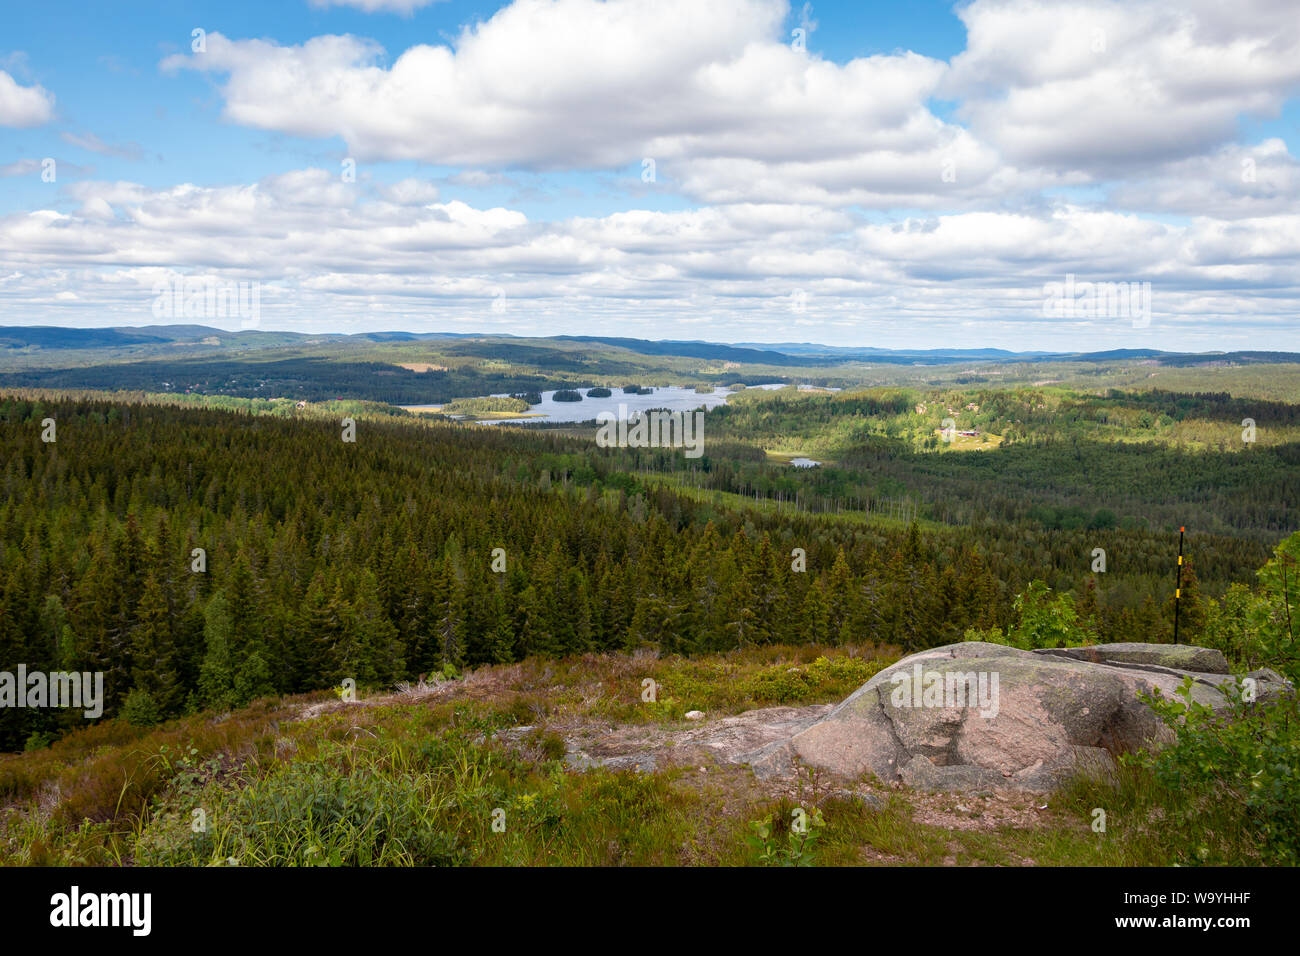 Swedish landscape with pine trees, hills and a lake, picture taken in region Dalarna, nearby Fredriksberg Stock Photo